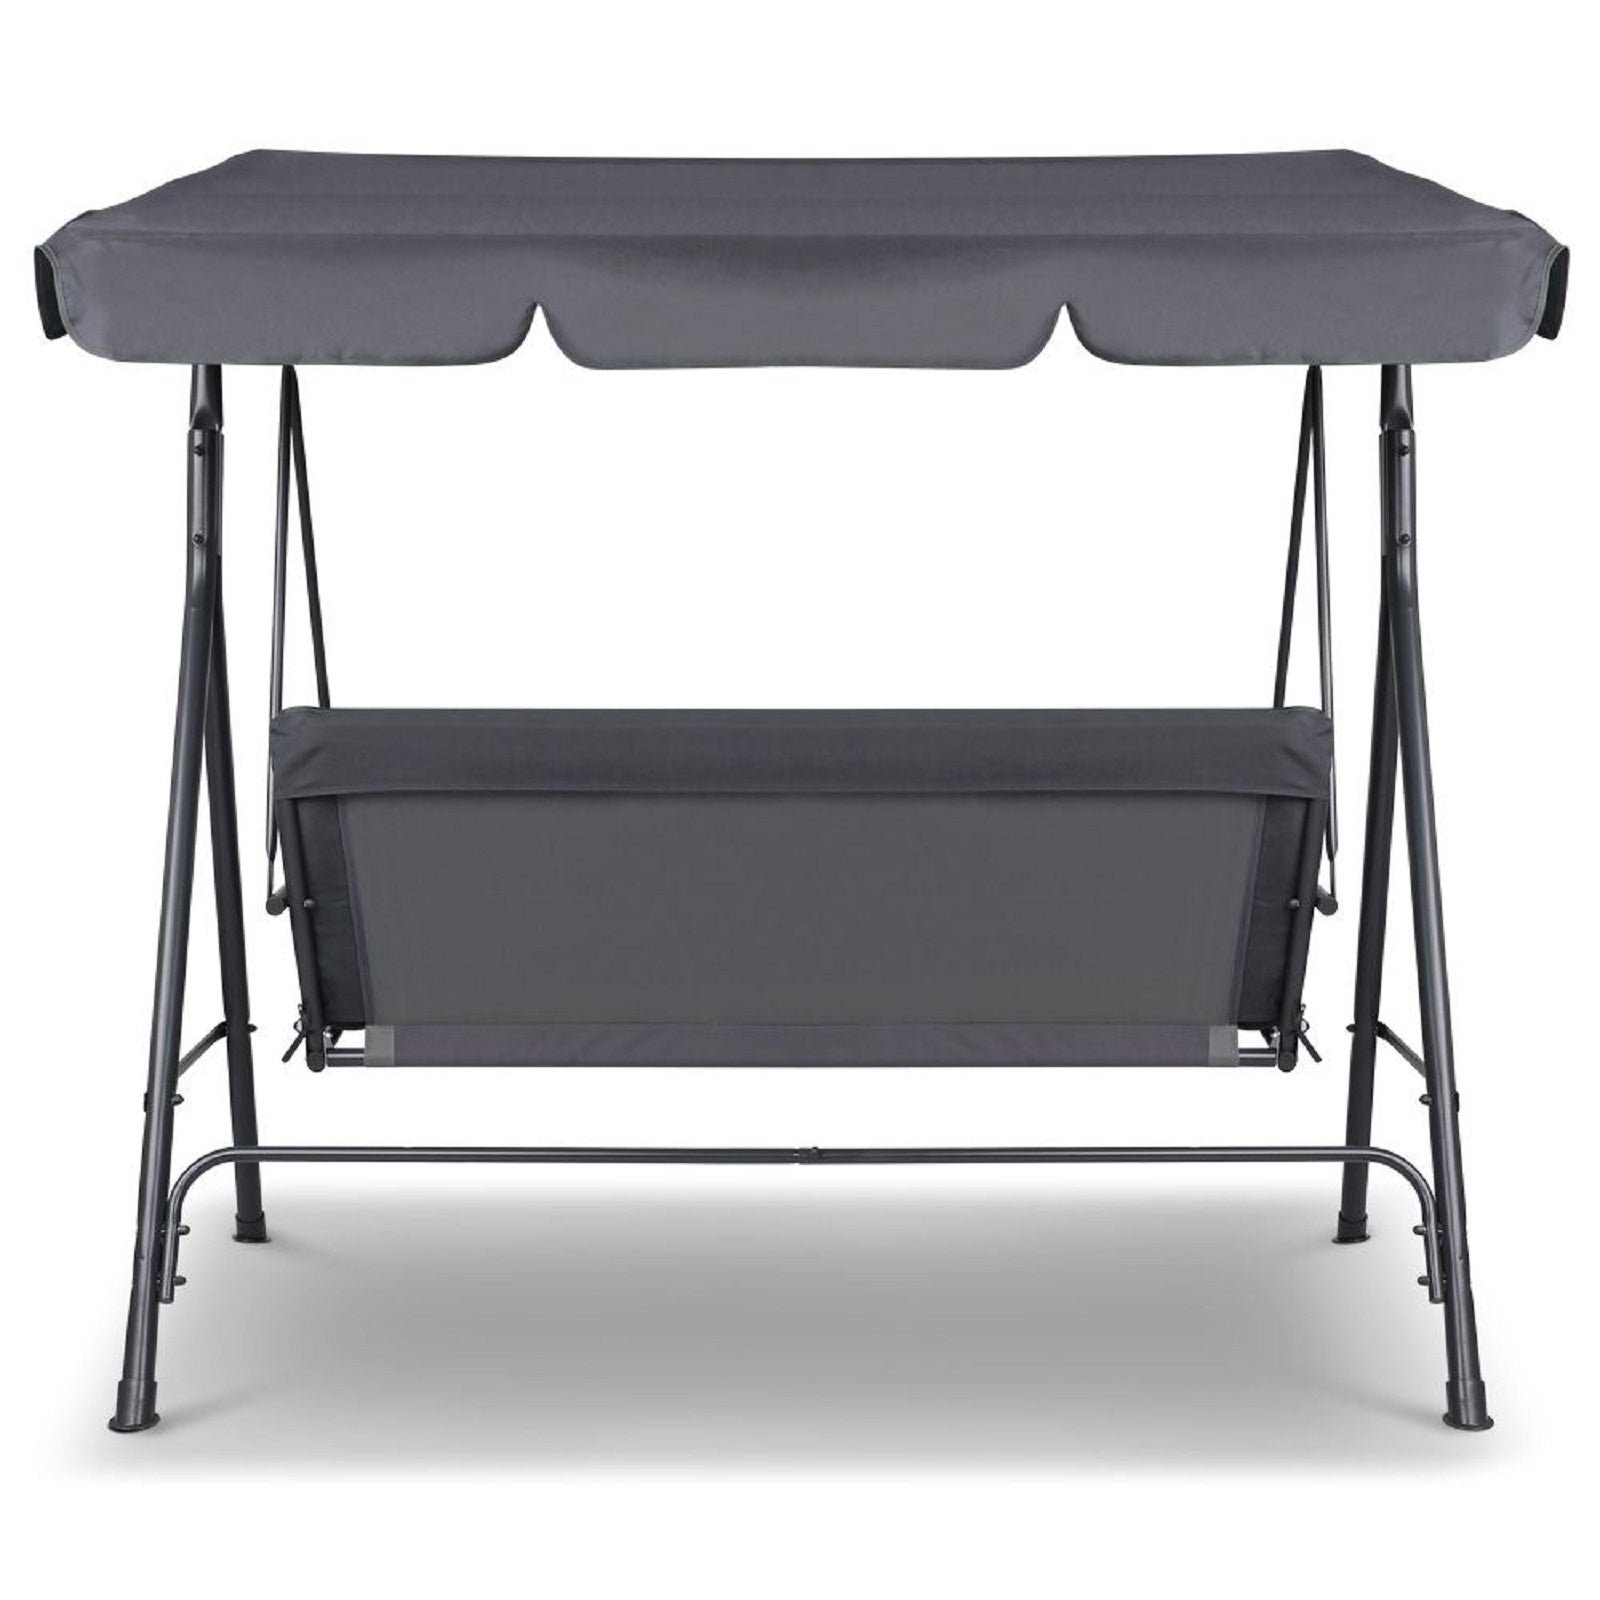 Milano Outdoor Swing Bench Seat Chair Canopy Furniture 3 Seater Garden Hammock - Grey